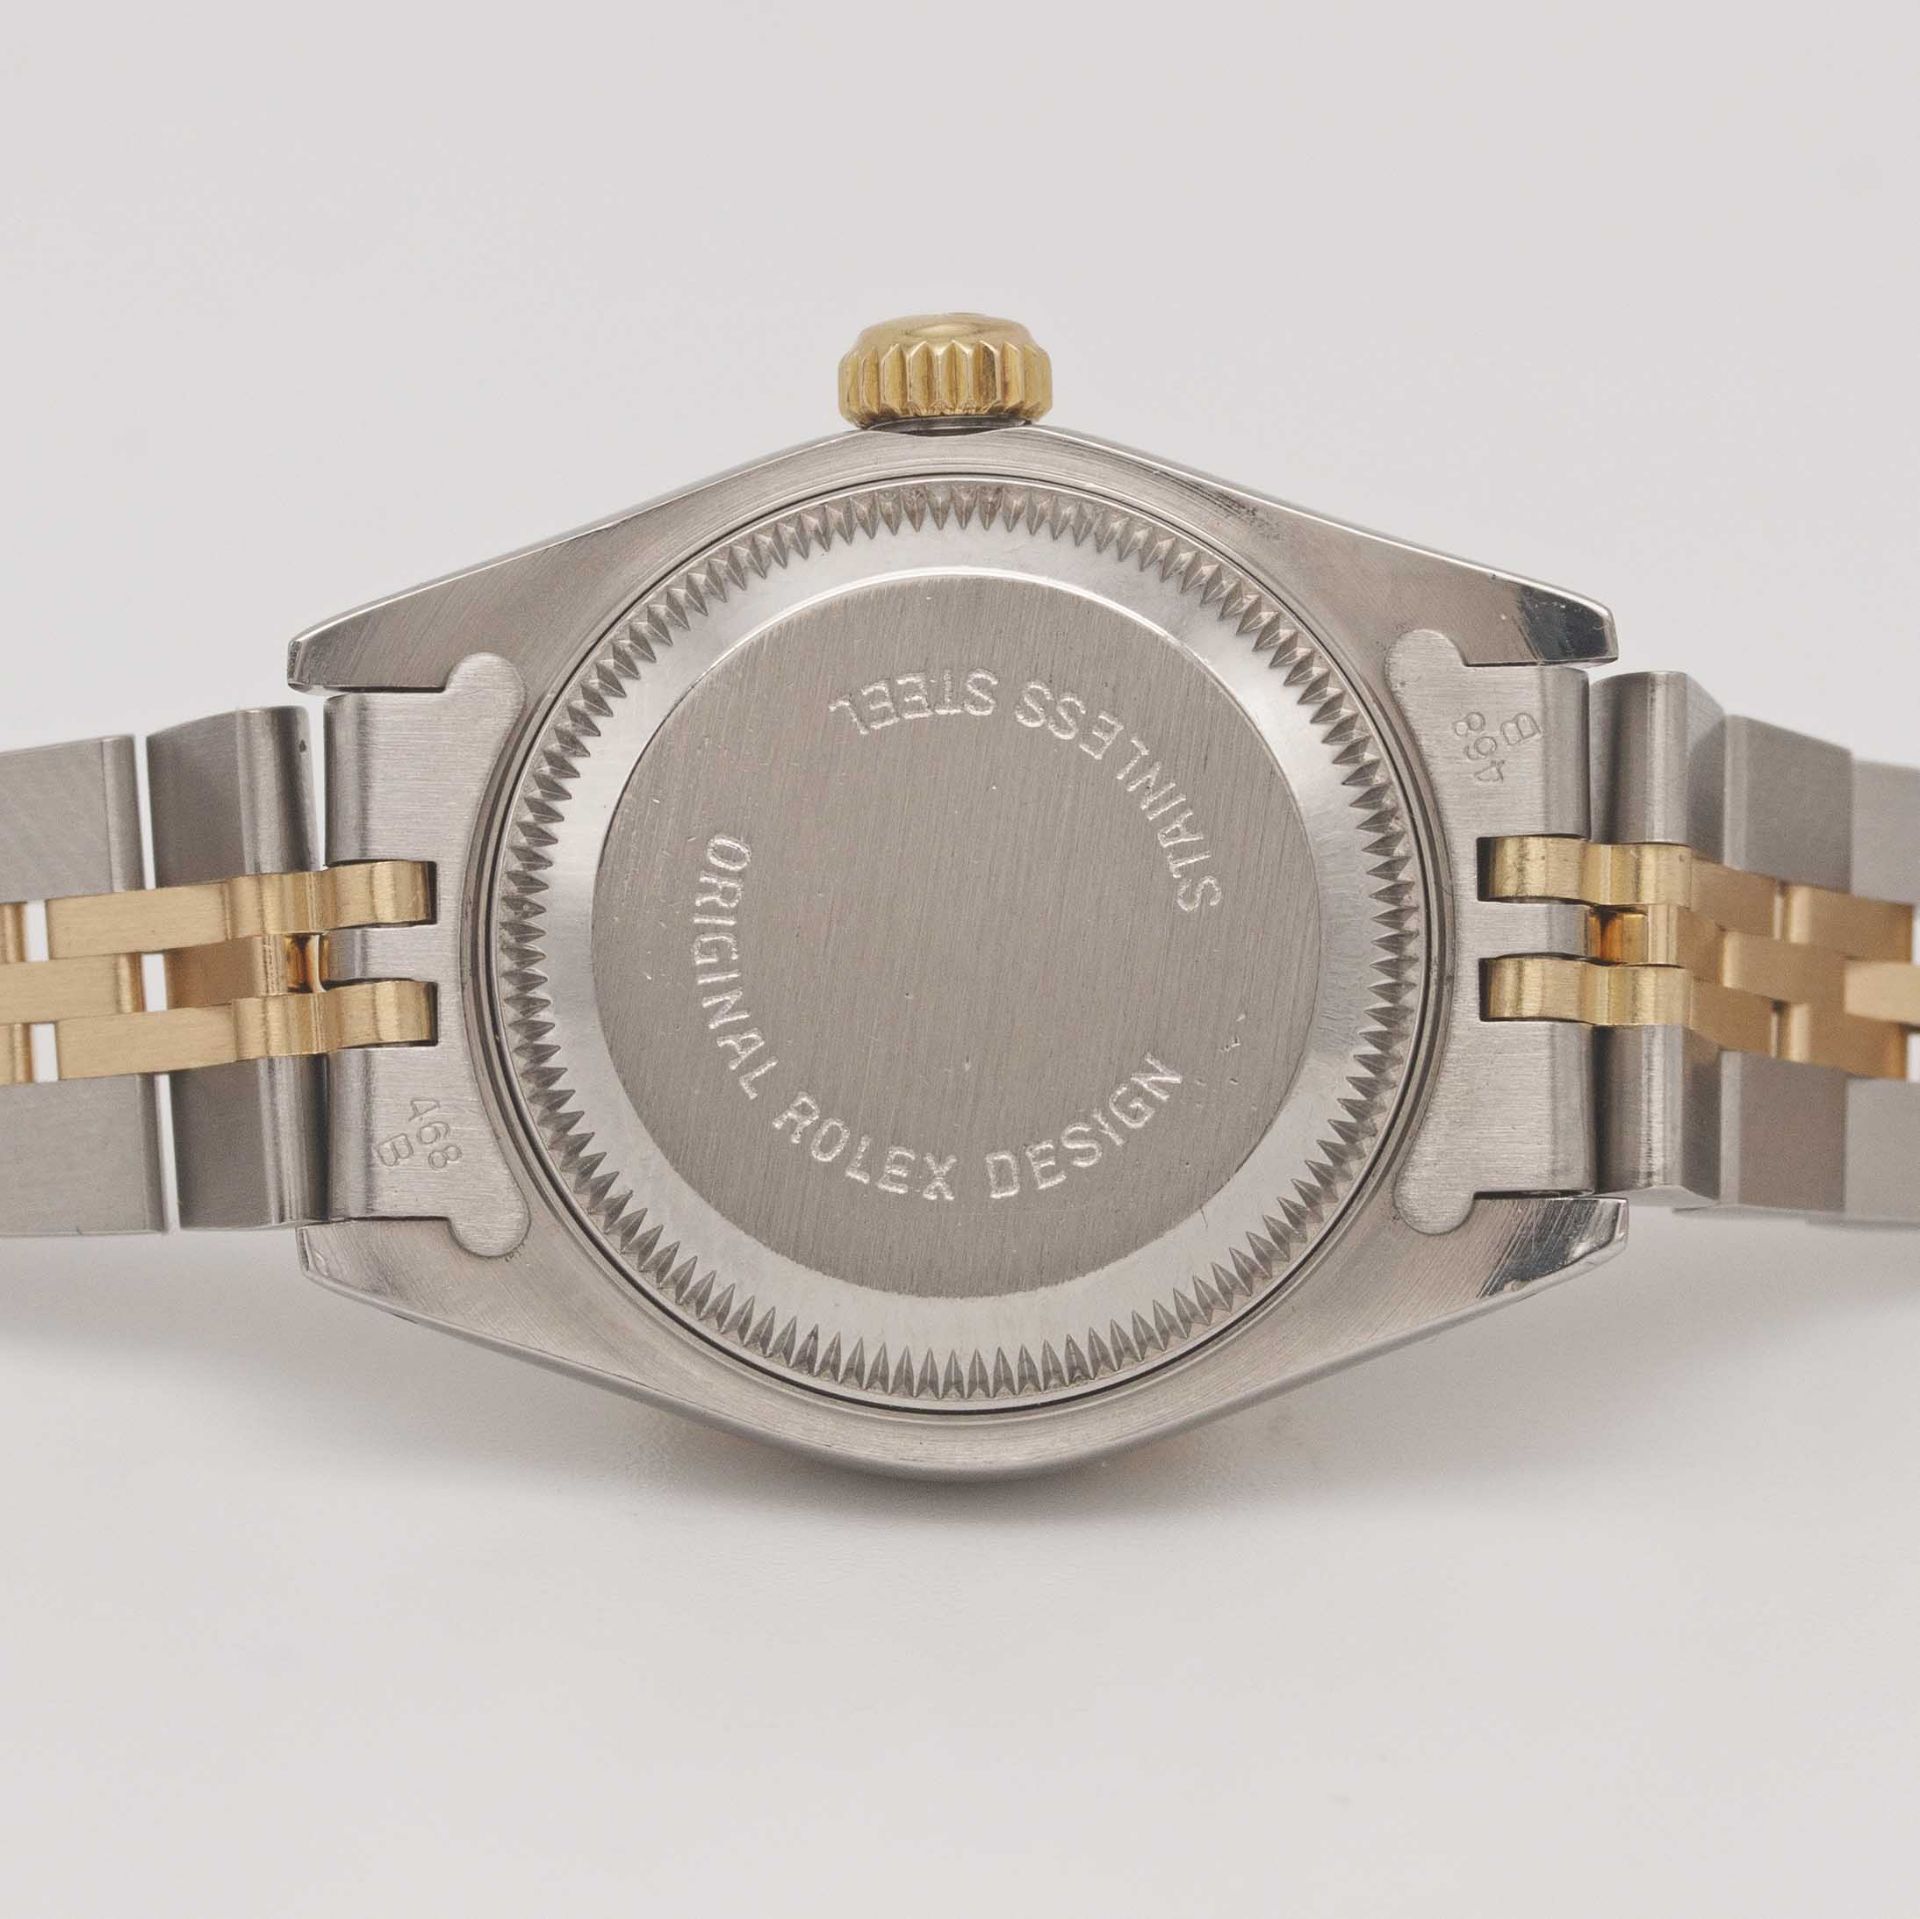 A LADIES STEEL & GOLD ROLEX OYSTER PERPETUAL DATEJUST BRACELET WATCH CIRCA 2000, REF. 69173 WITH - Image 6 of 12